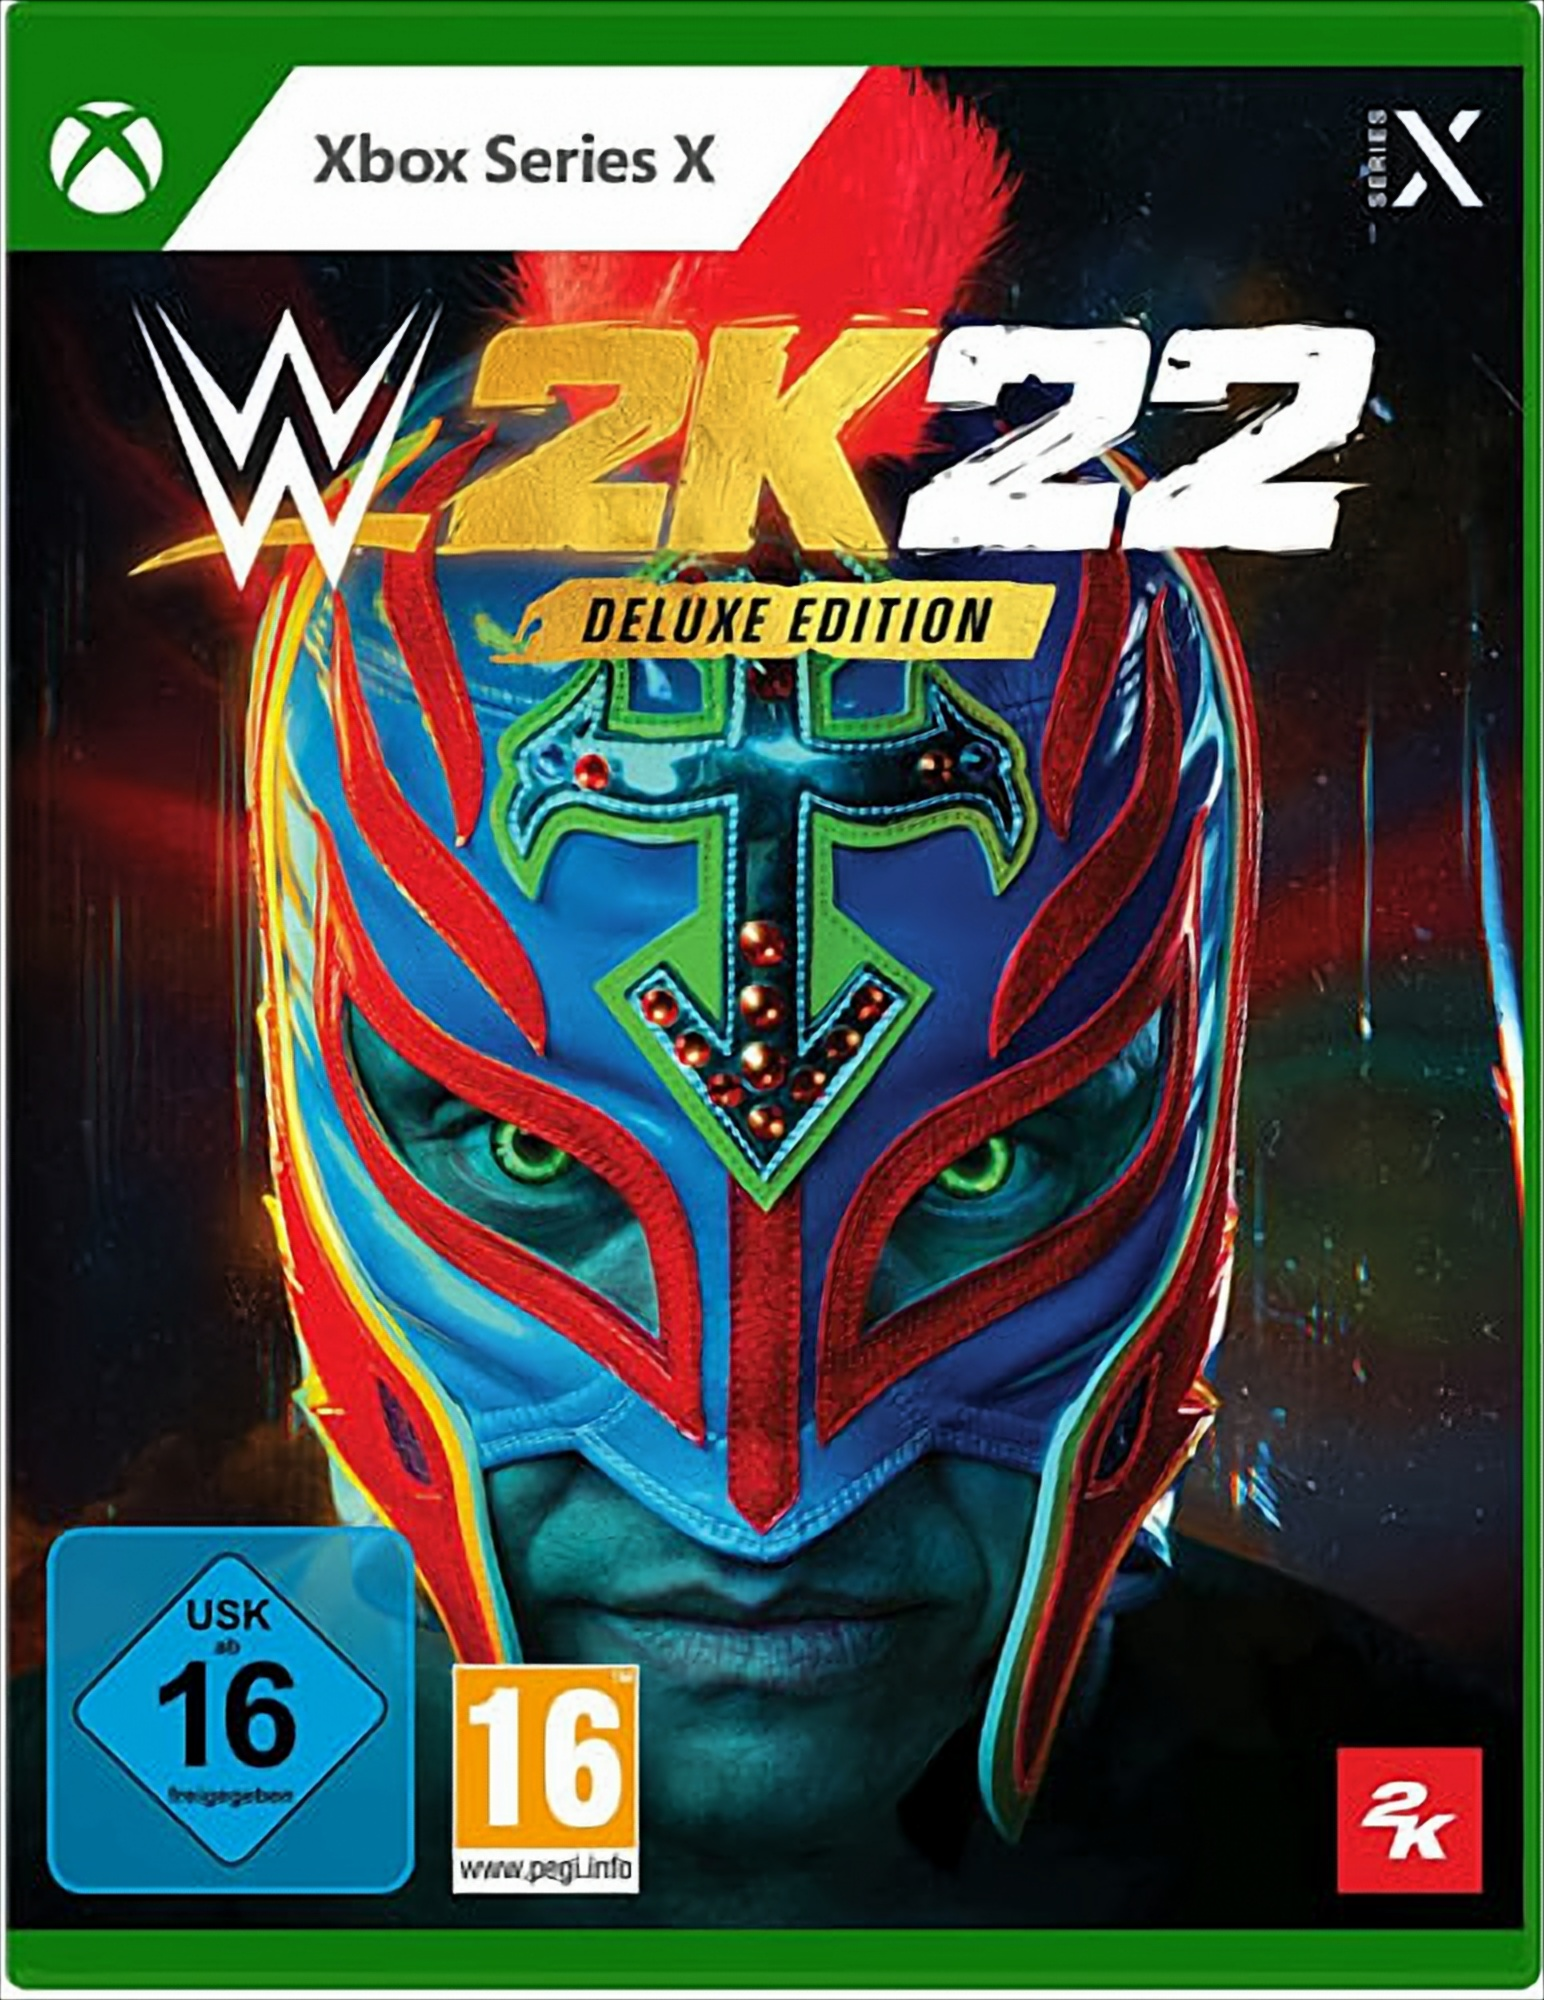 X|S] 2K22 Edition Series WWE Deluxe [Xbox - -